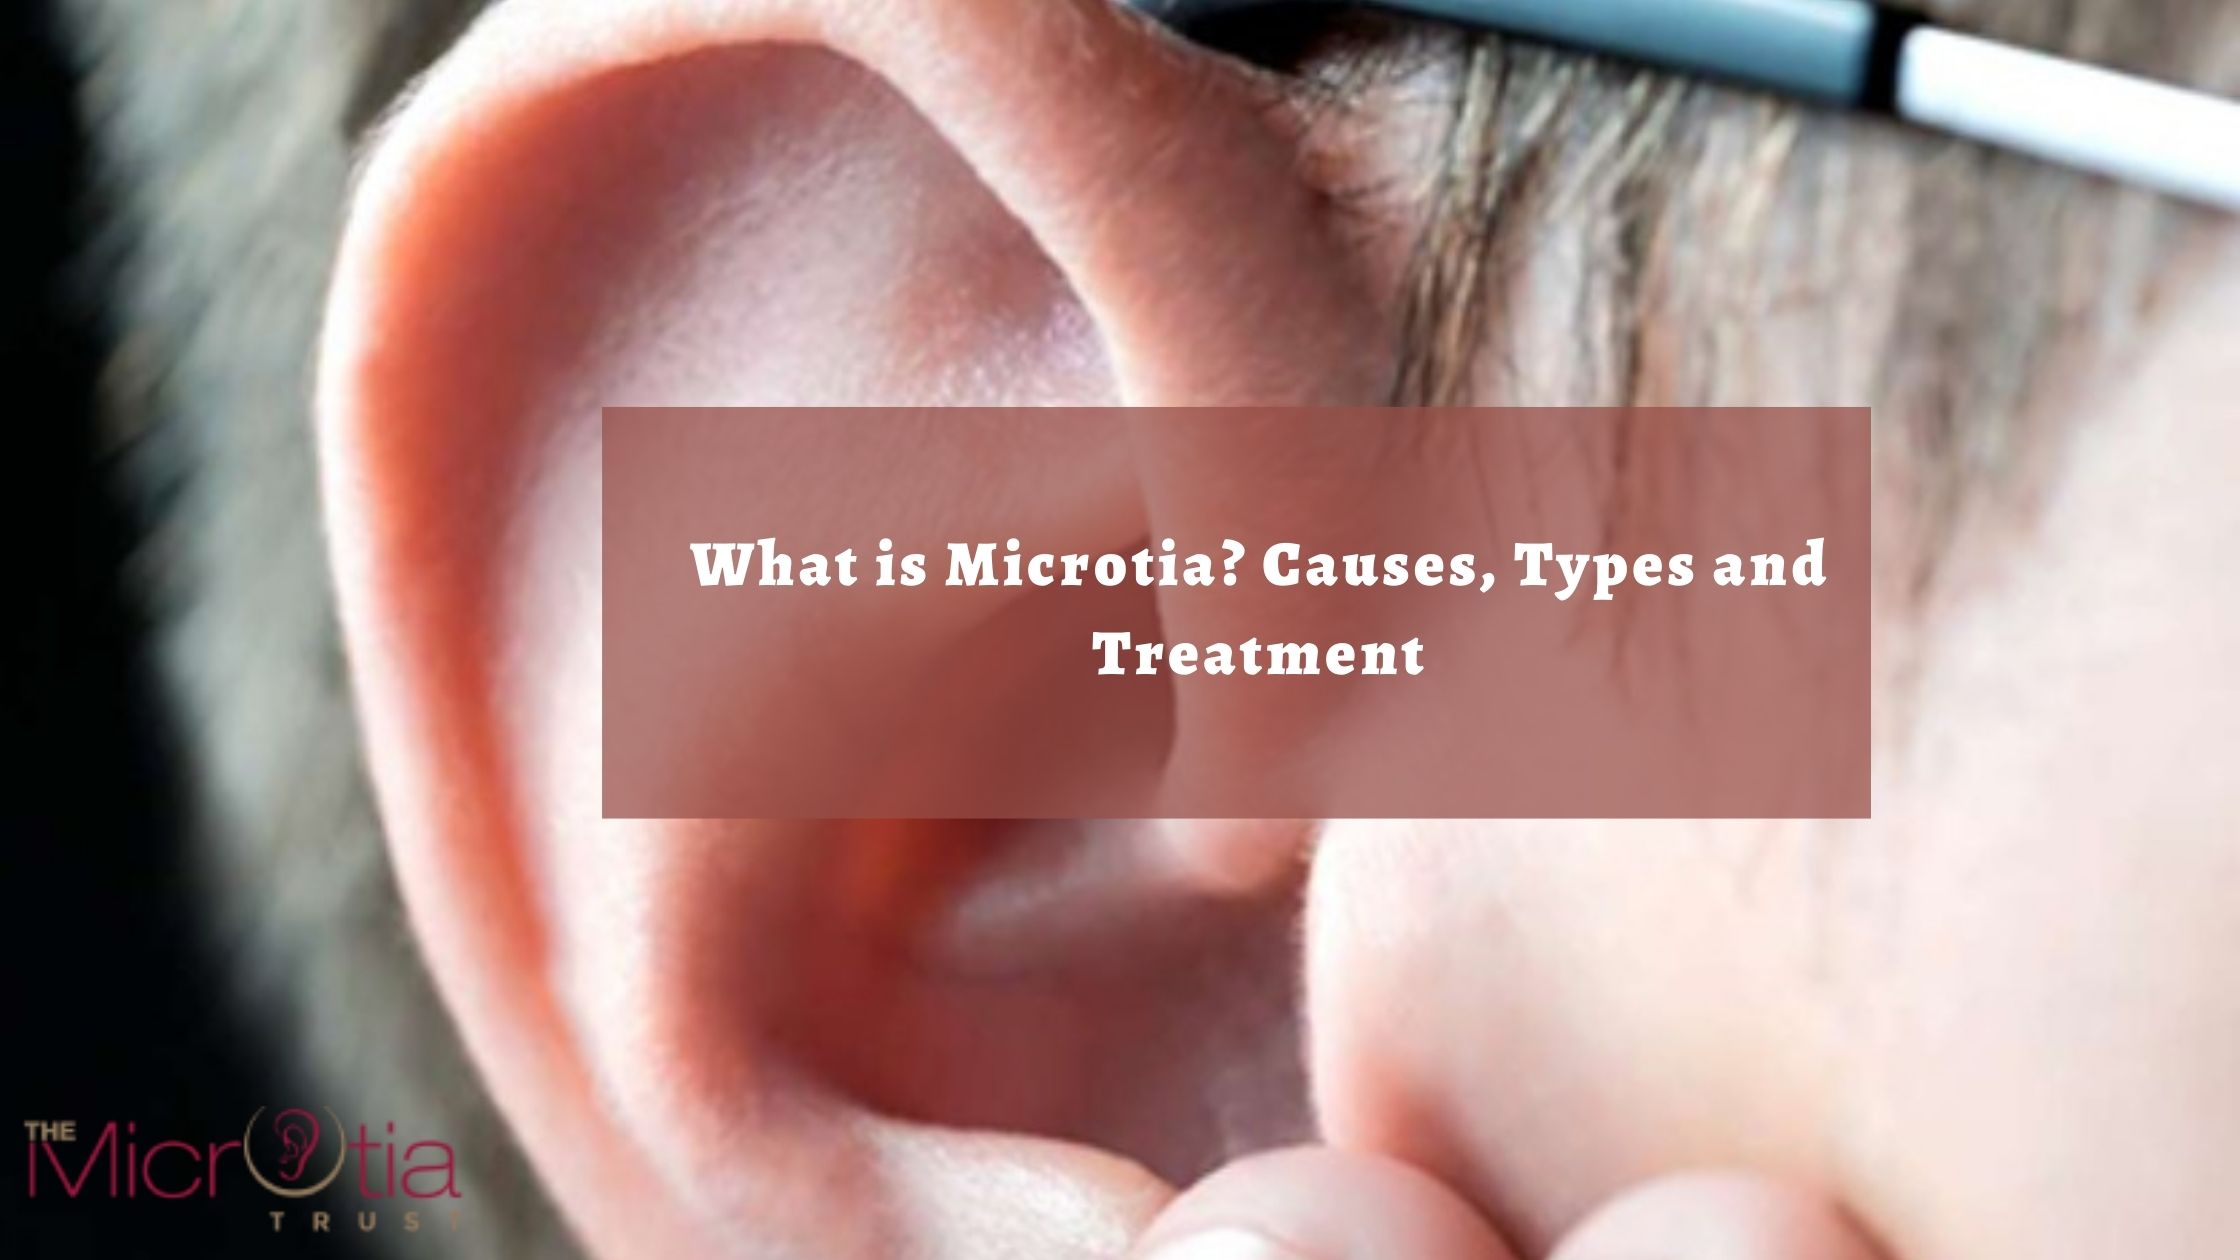 What is Microtia Causes, Types and Treatment-317c4904